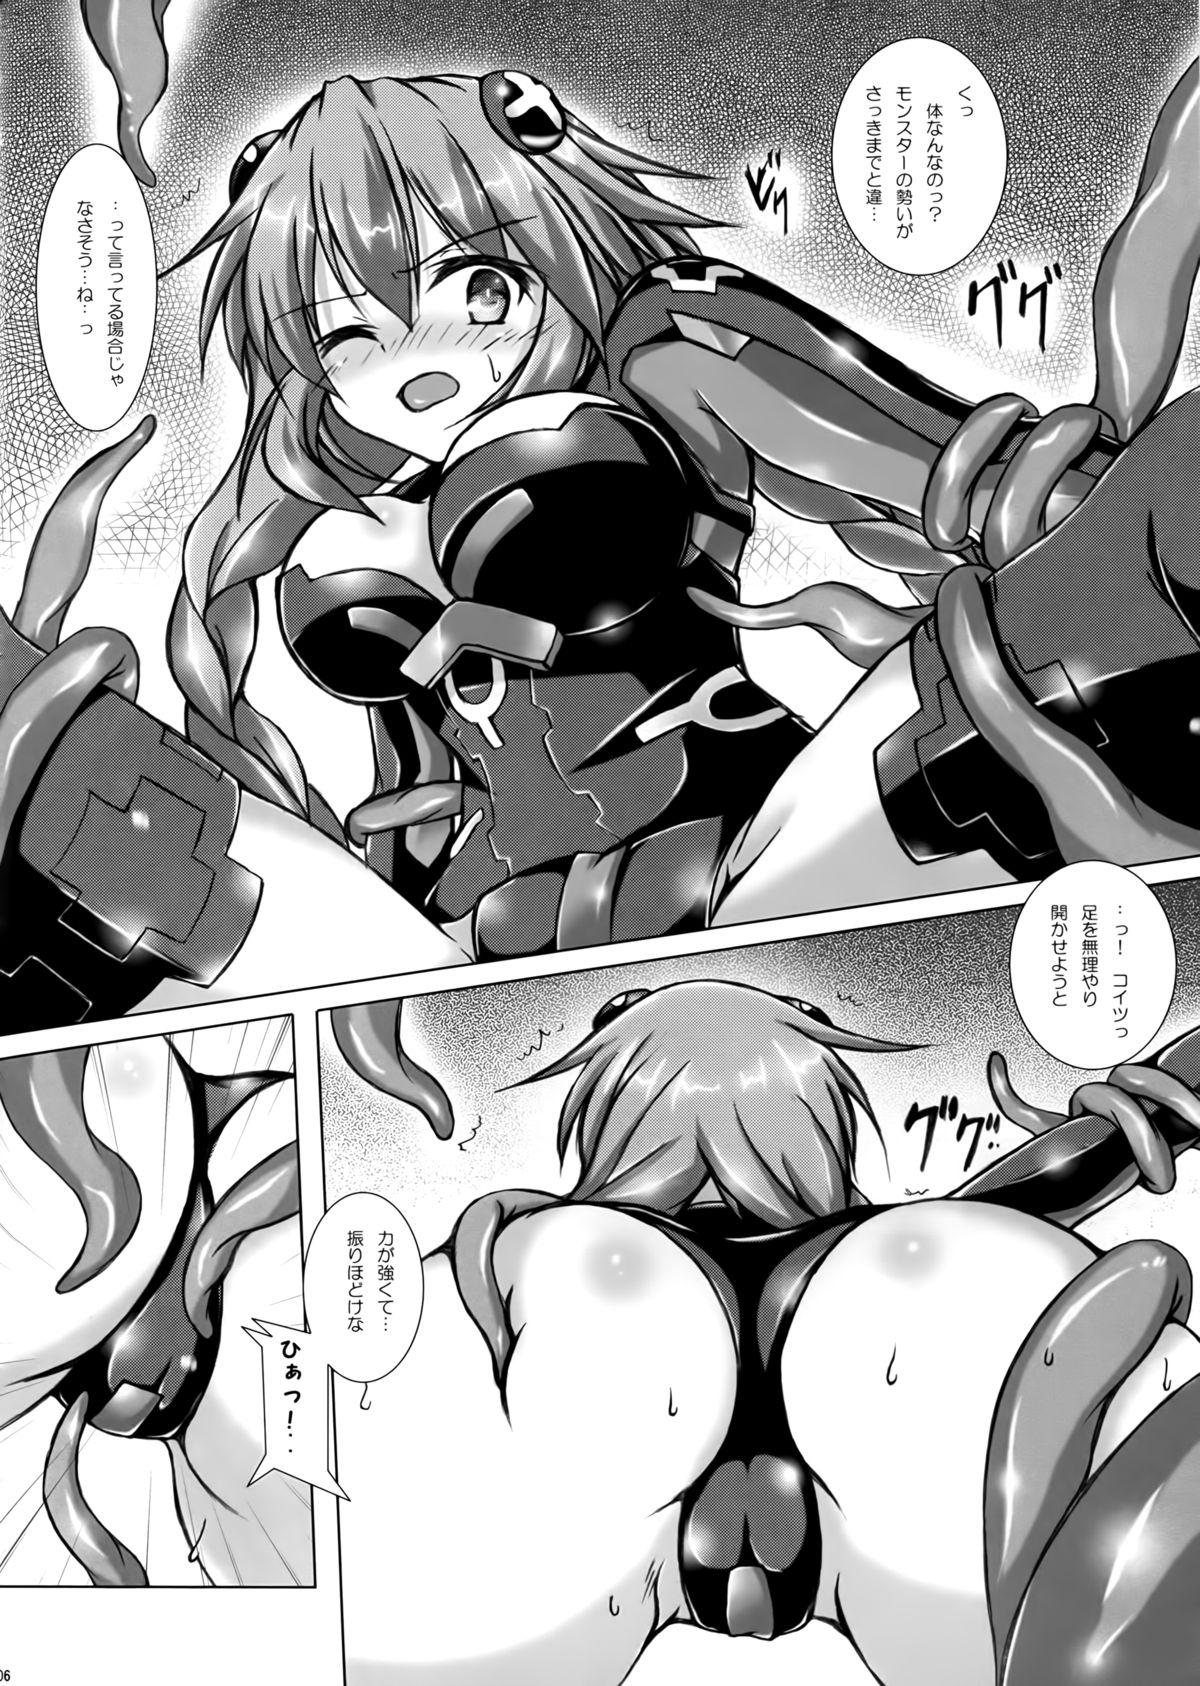 Twink Tentacle Syndrome - Hyperdimension neptunia Bigdick - Page 6